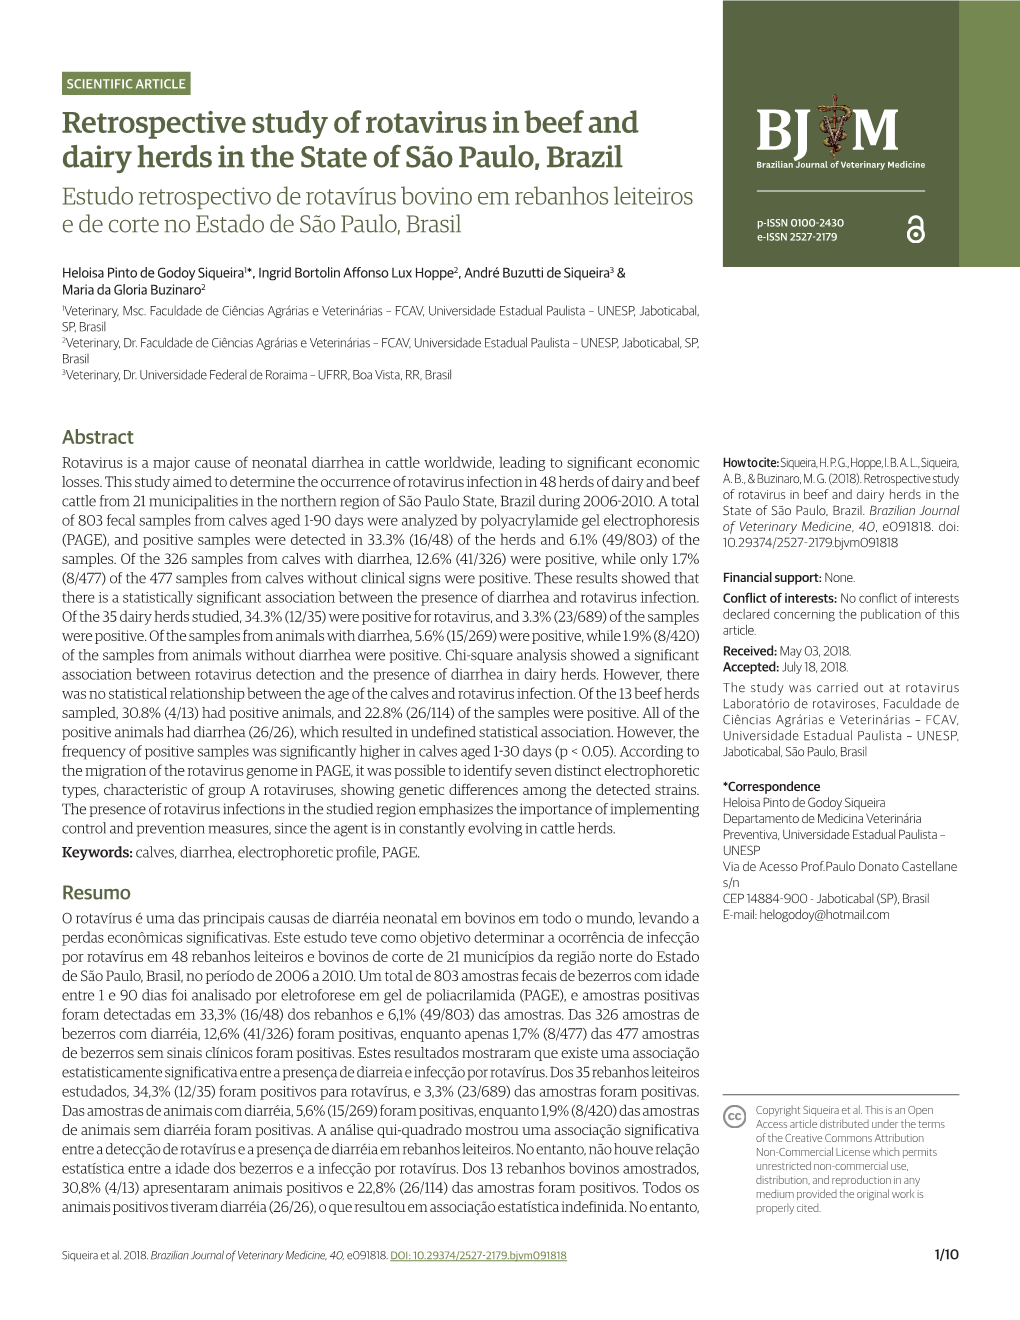 Retrospective Study of Rotavirus in Beef and Dairy Herds in the State Of